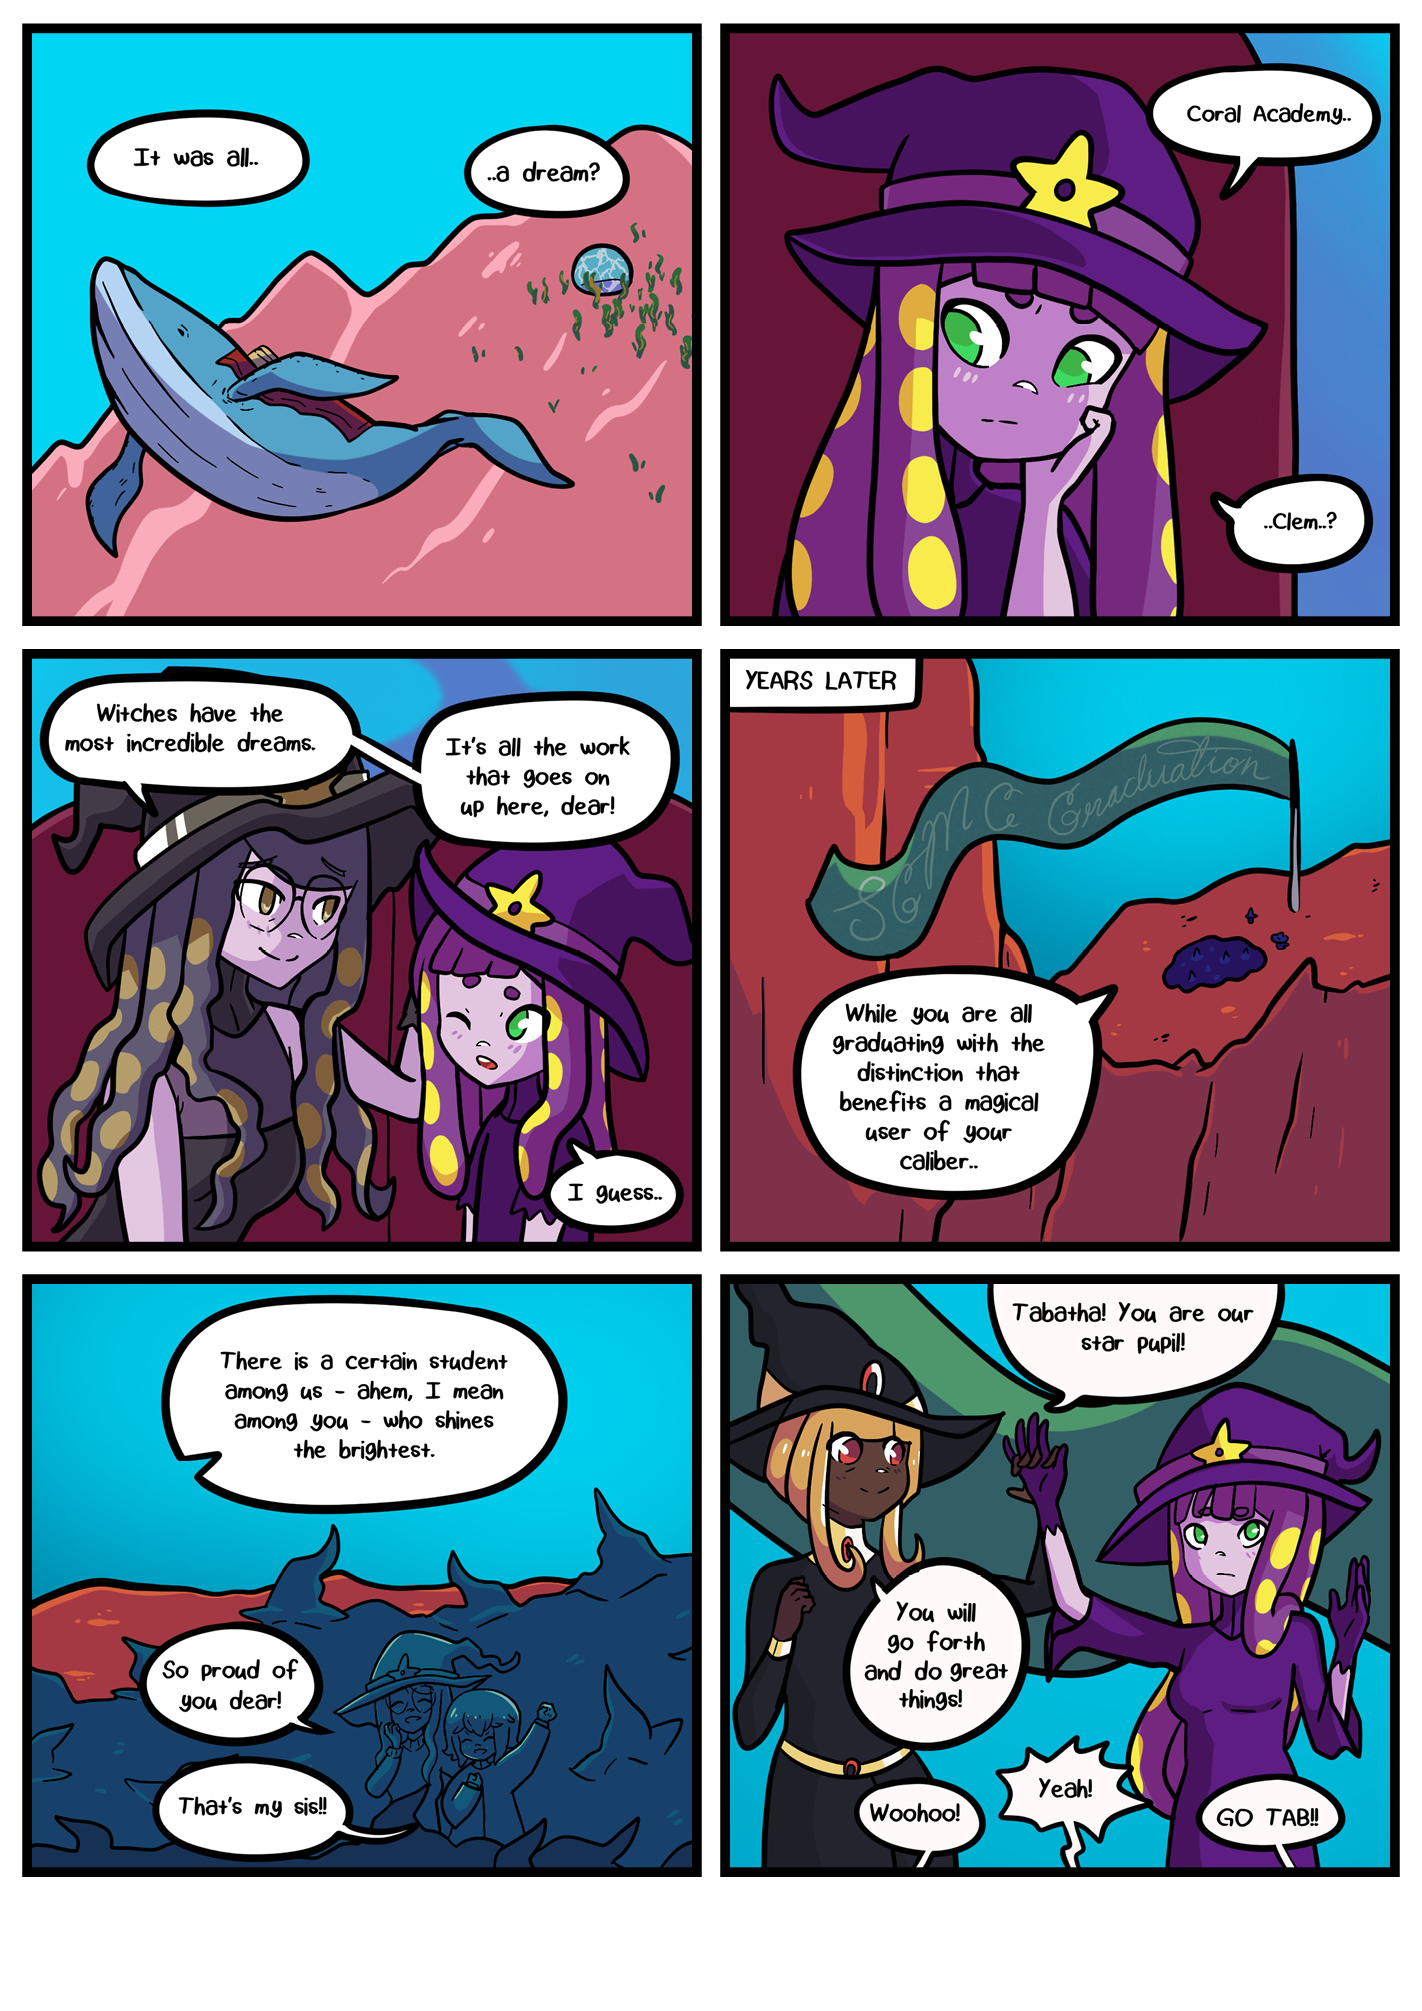 Seasick the underwater adventure comic, chapter 2 page 73 full